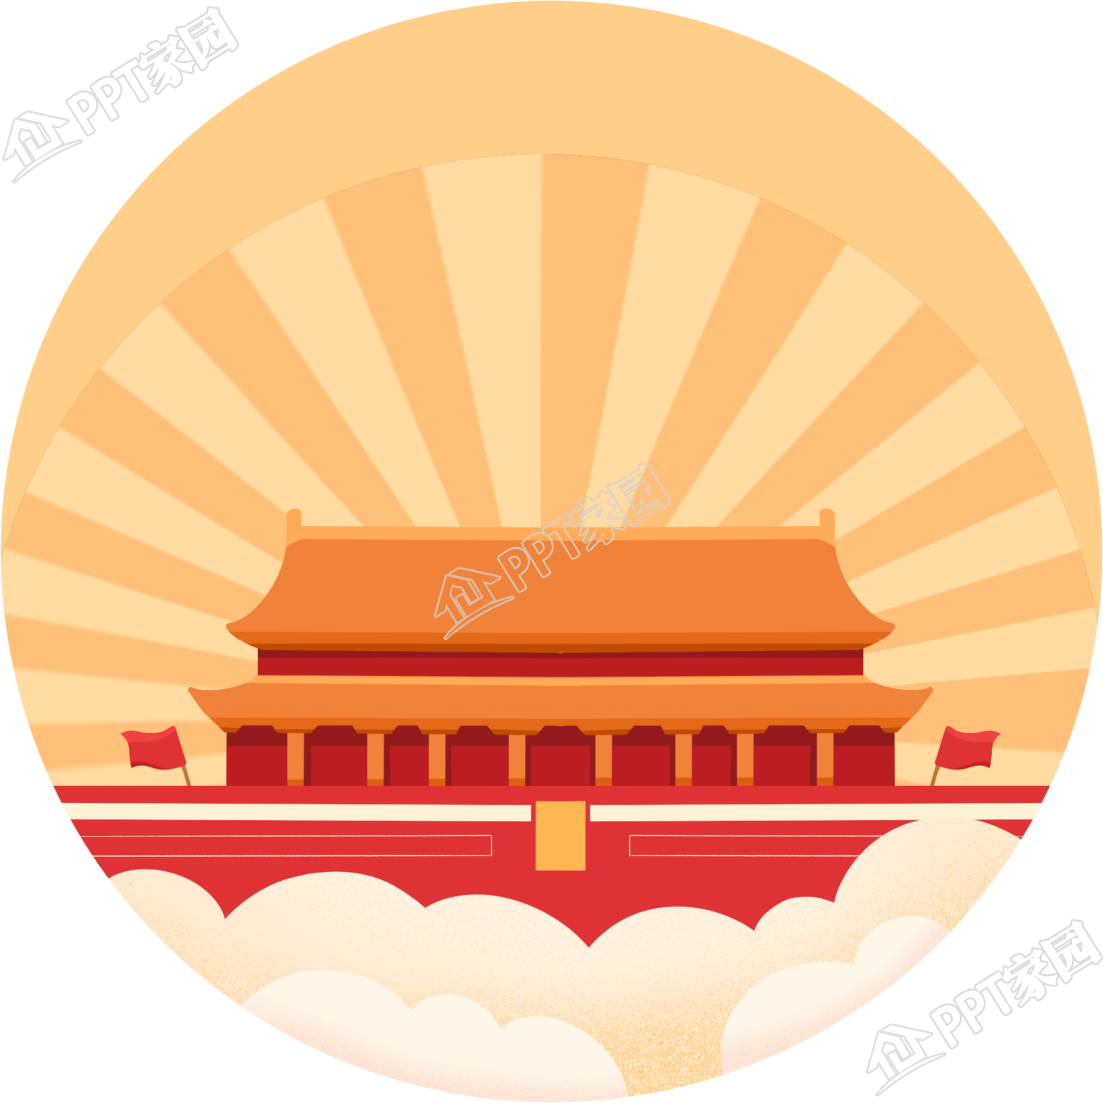 Round tiananmen square icon picture material download recommended